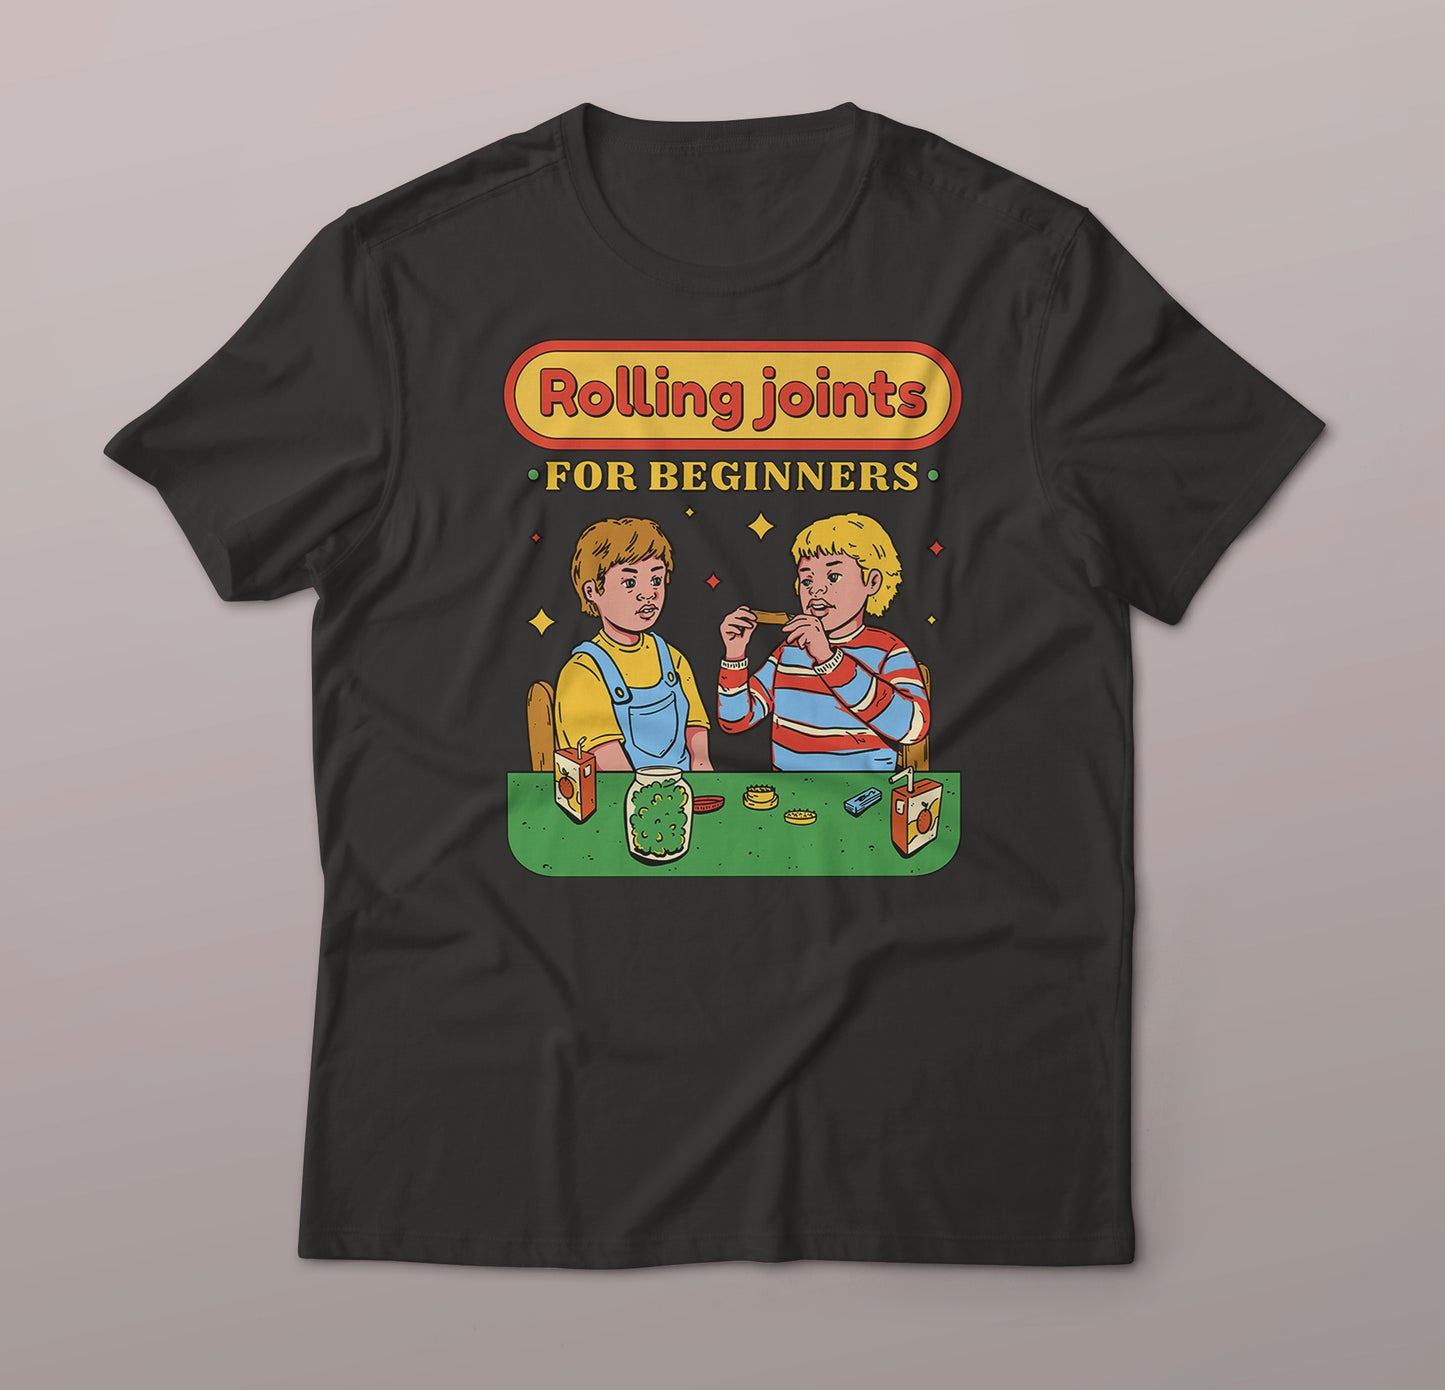 Rolling Joints for Beginners Ladies Fit T-shirt